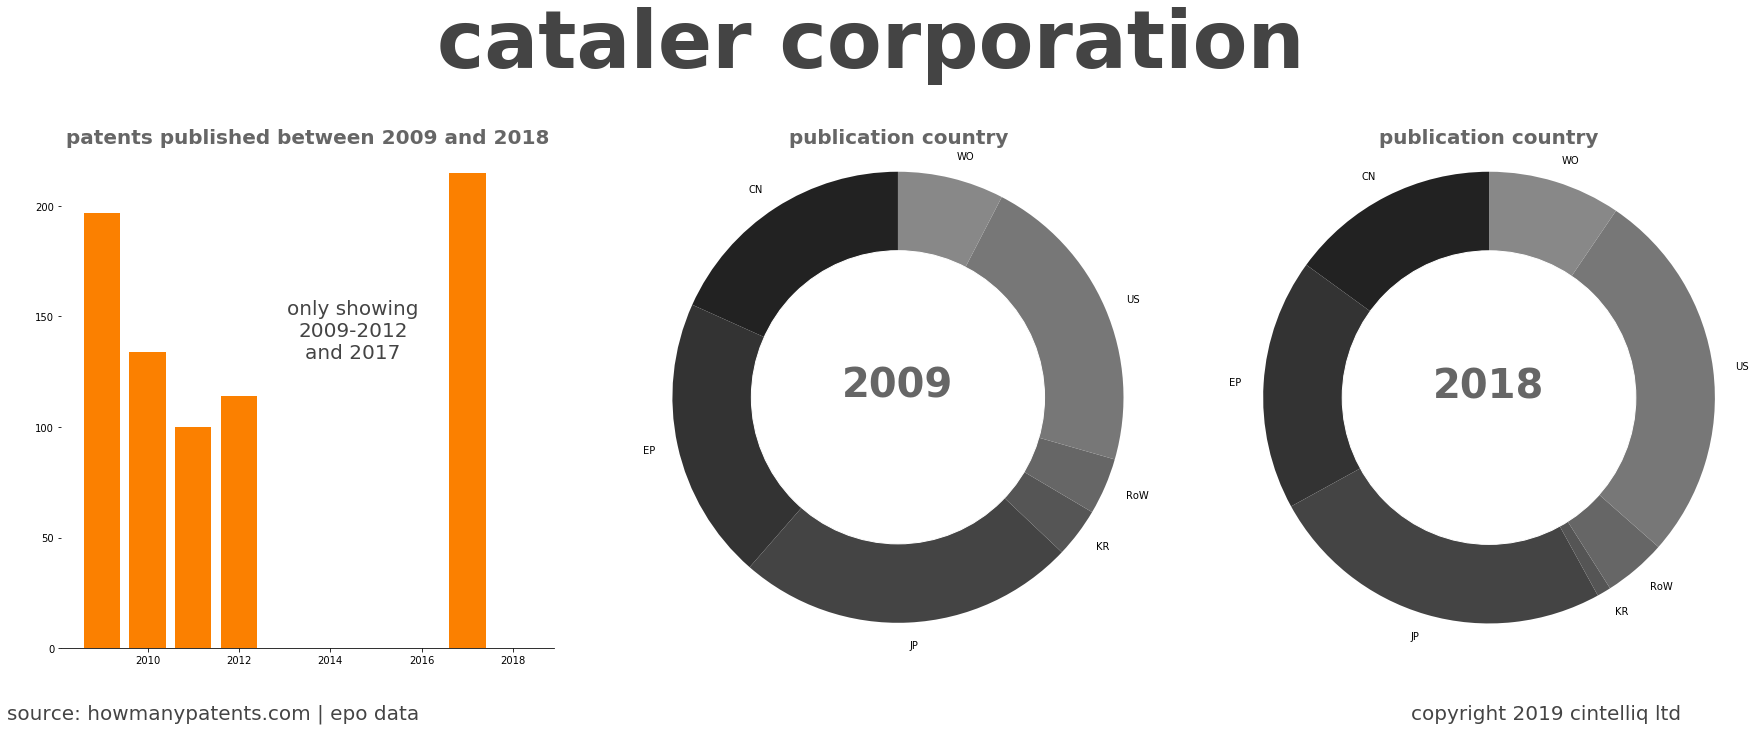 summary of patents for Cataler Corporation